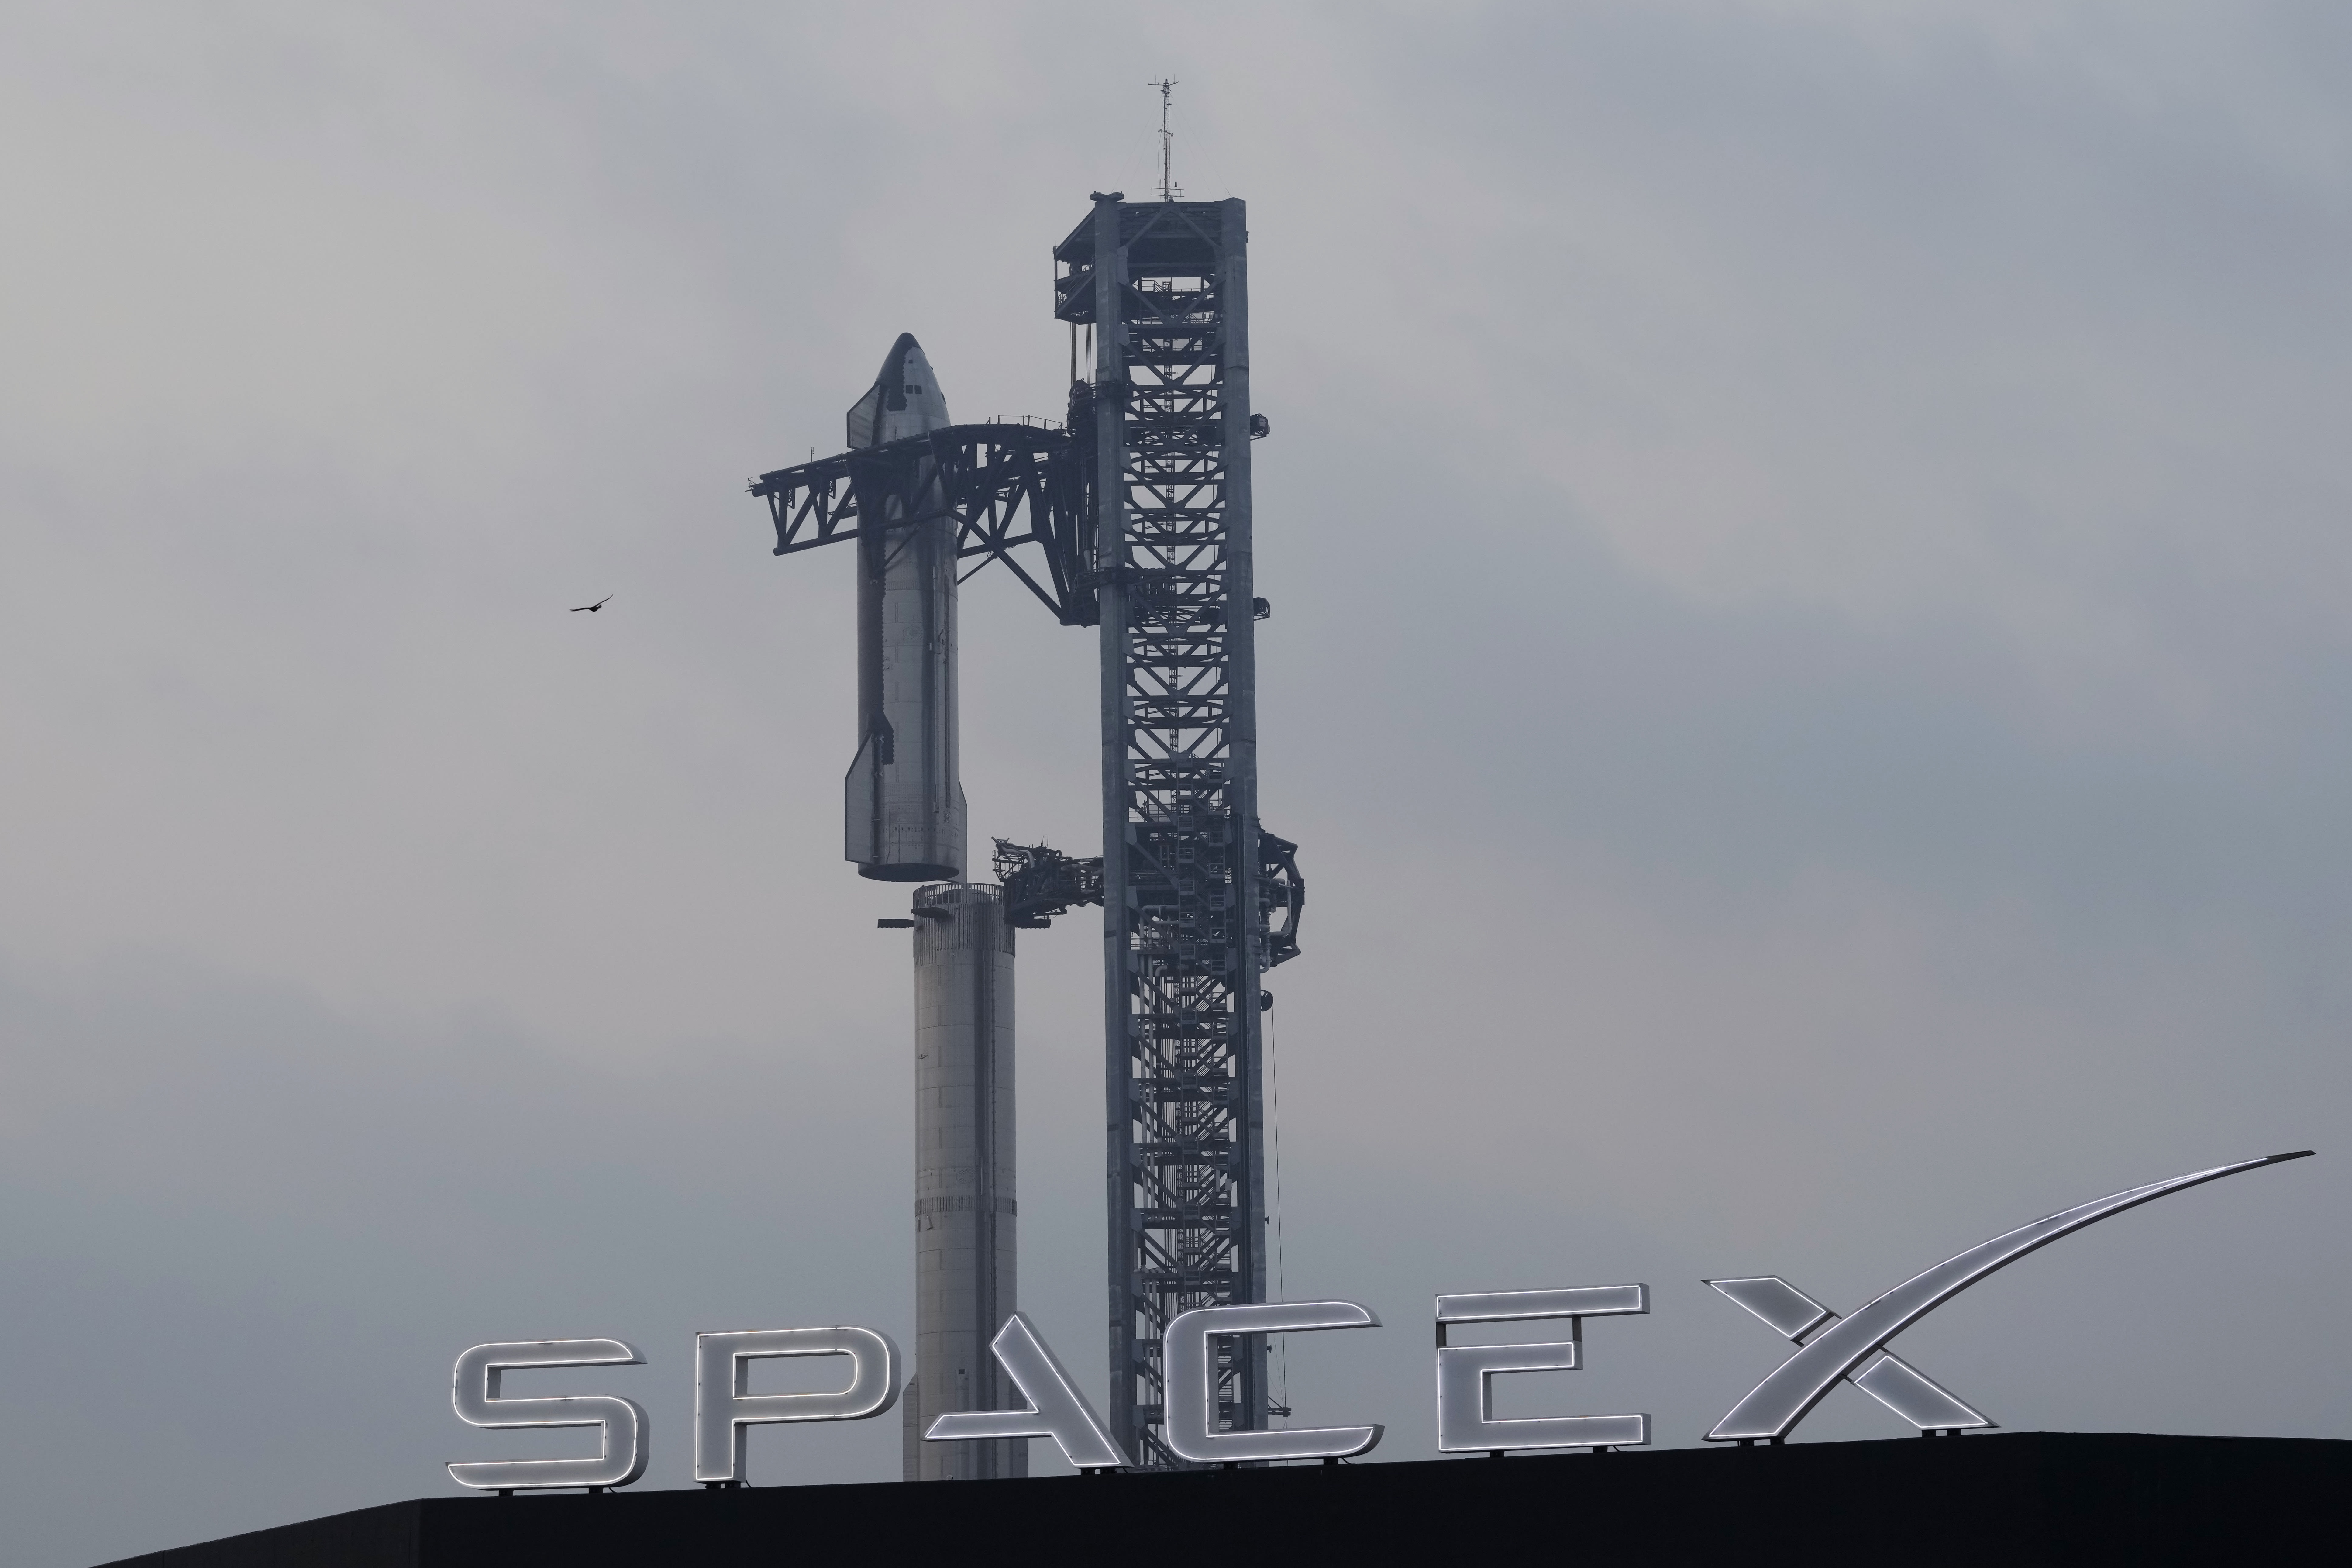 SpaceX's mega rocket completes its fourth test flight from Texas without exploding